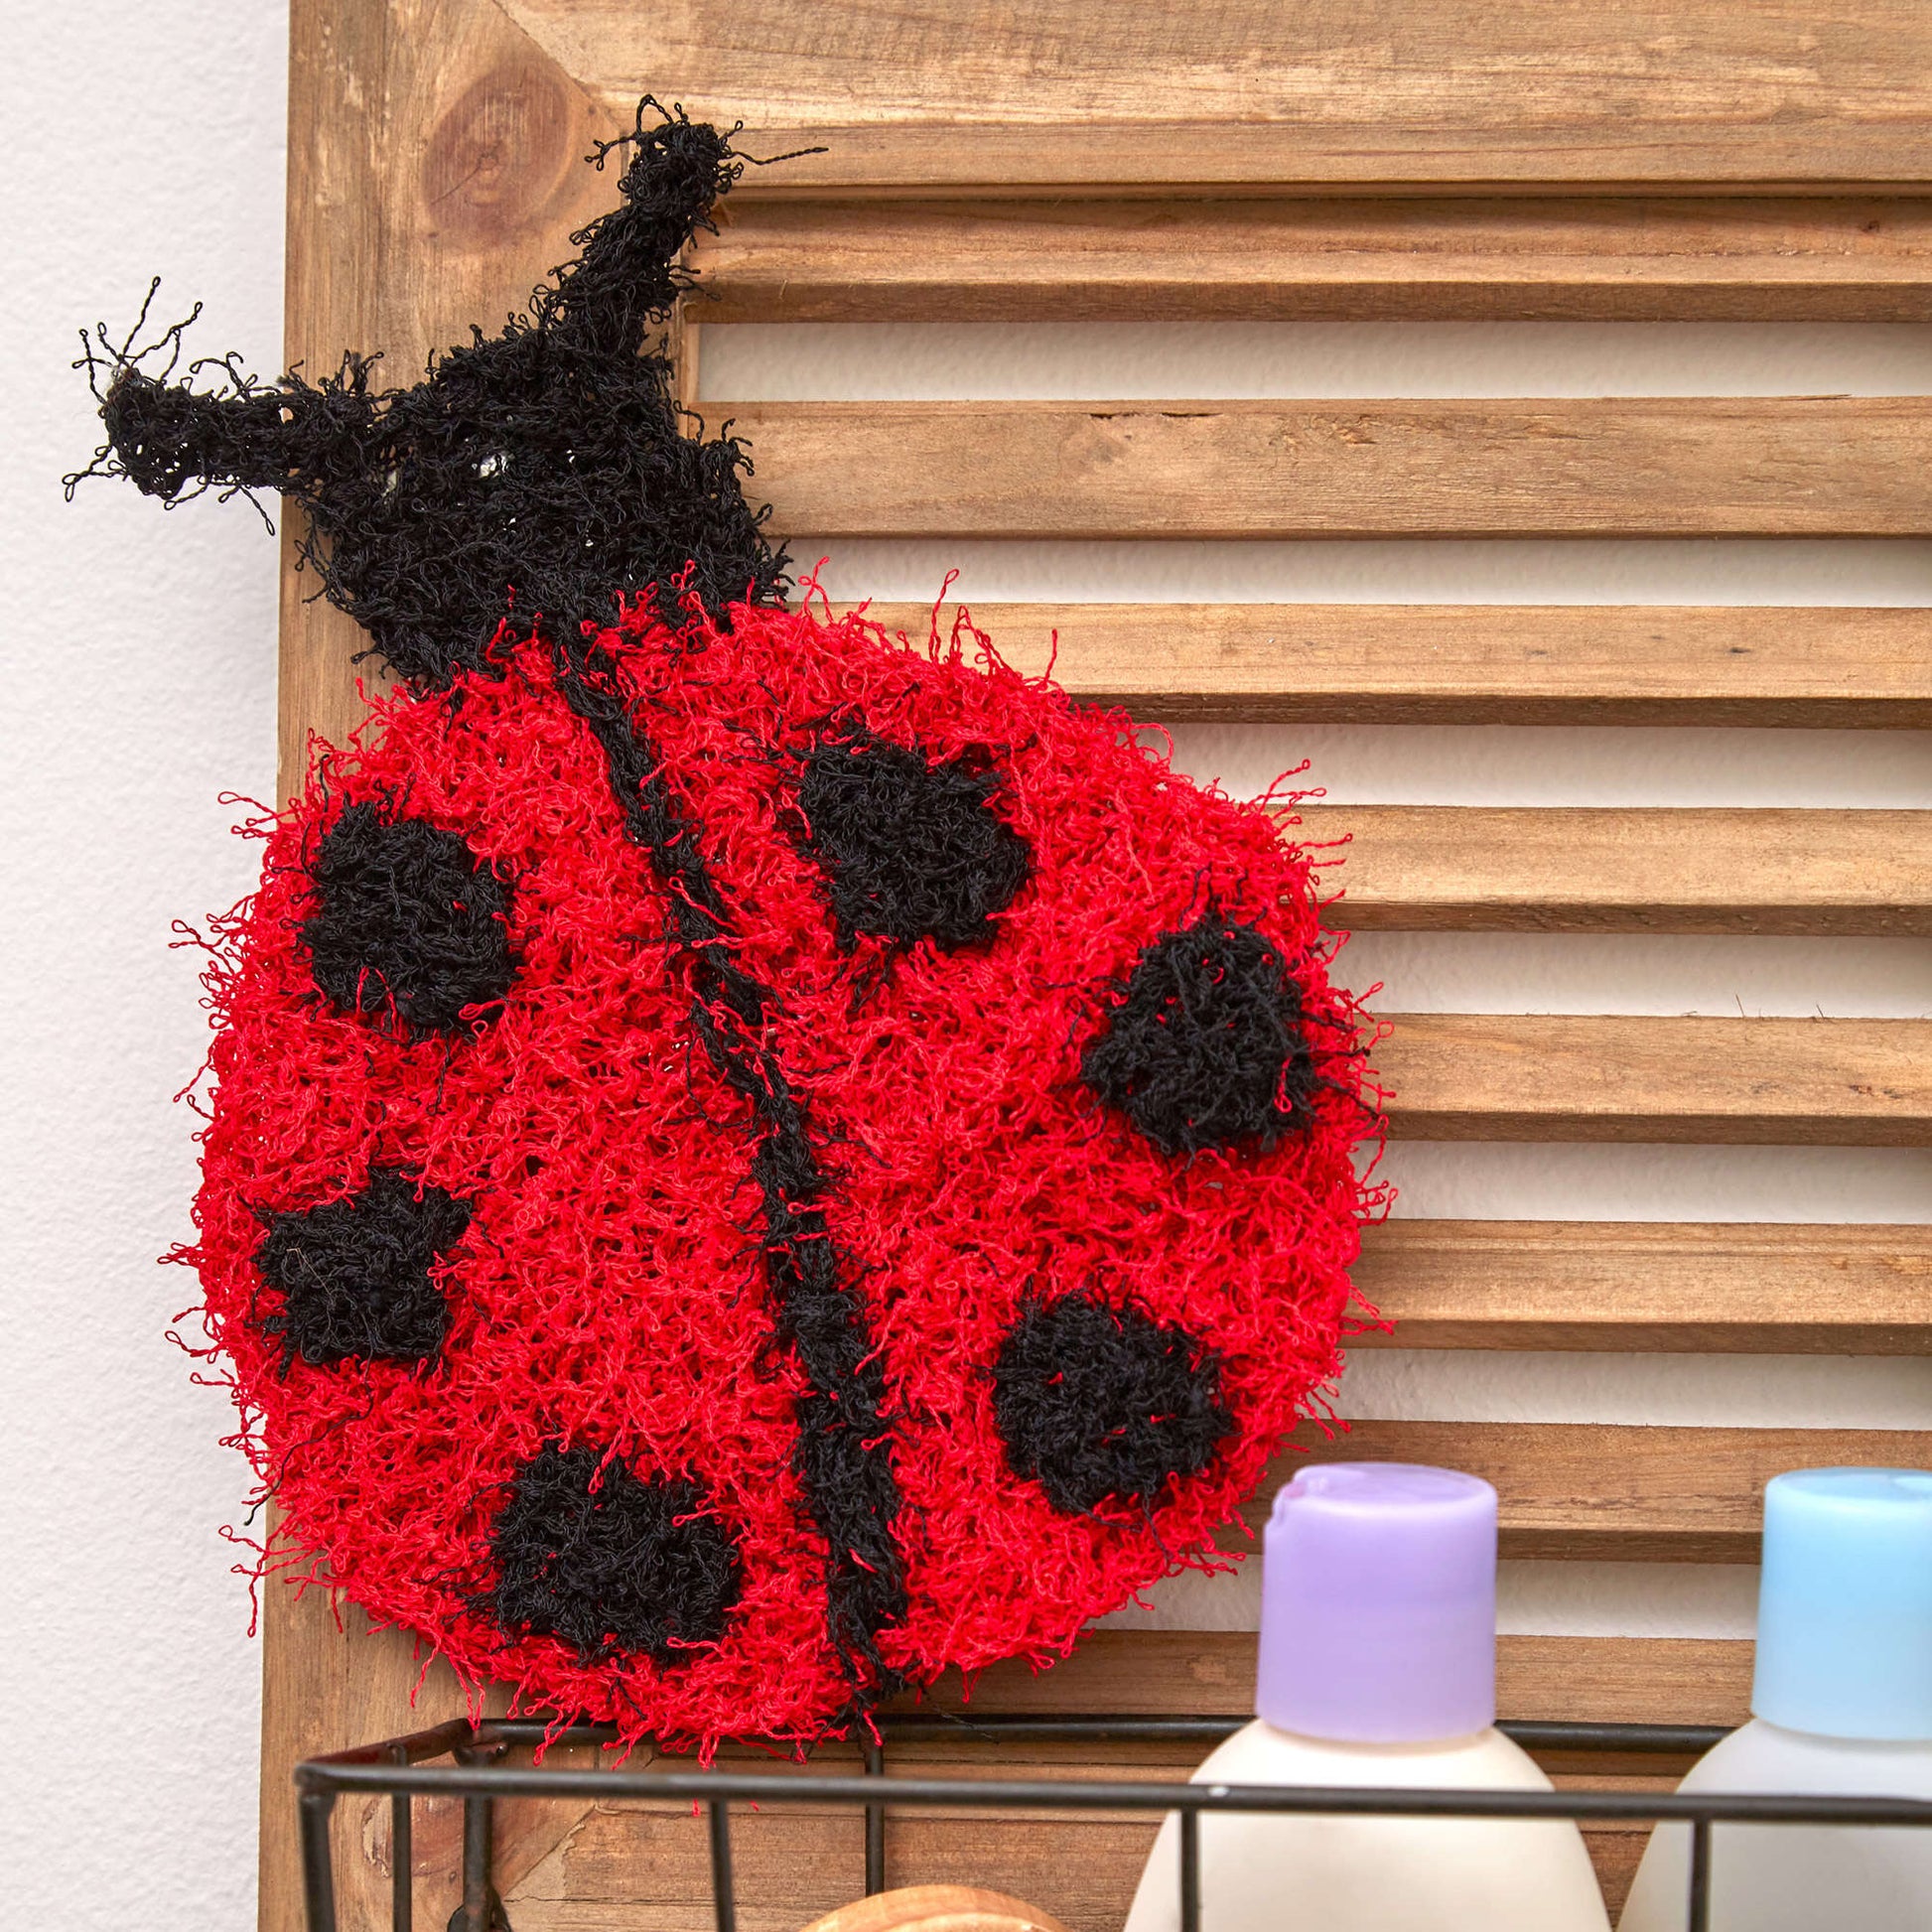 Free Red Heart Lucky Ladybug Scrubby Knit Pattern